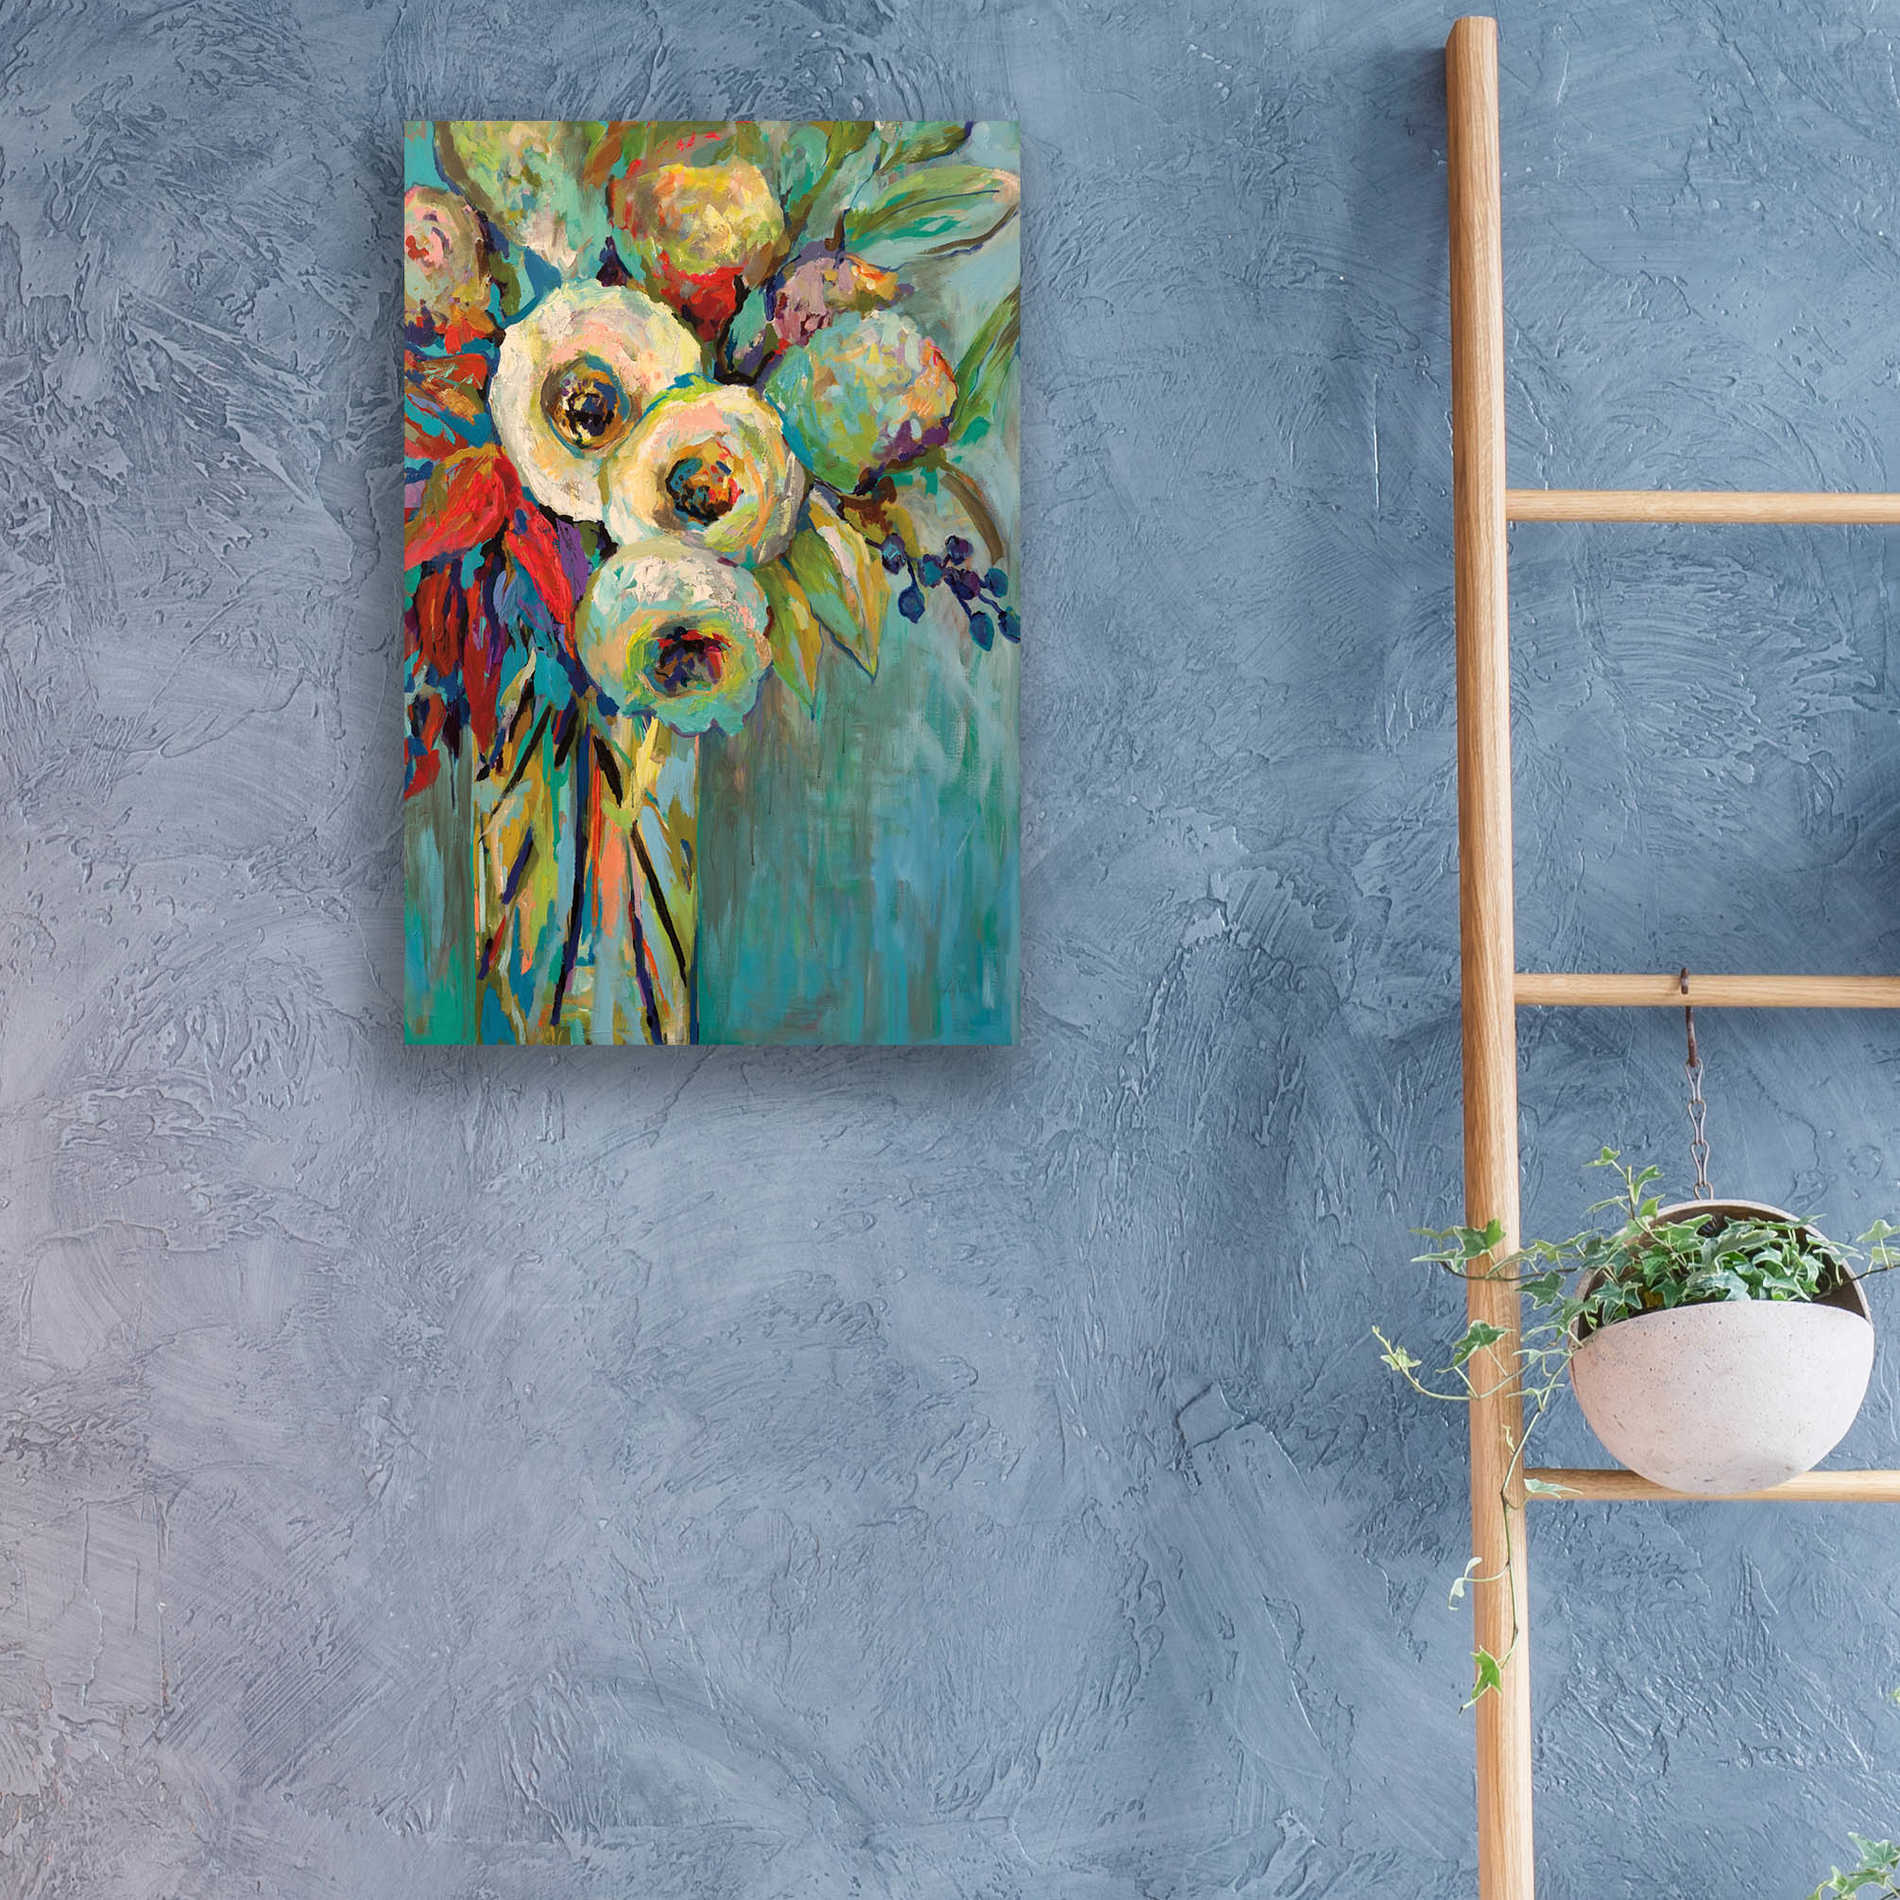 Epic Art 'Mod Floral' by Jeanette Vertentes, Acrylic Glass Wall Art,16x24